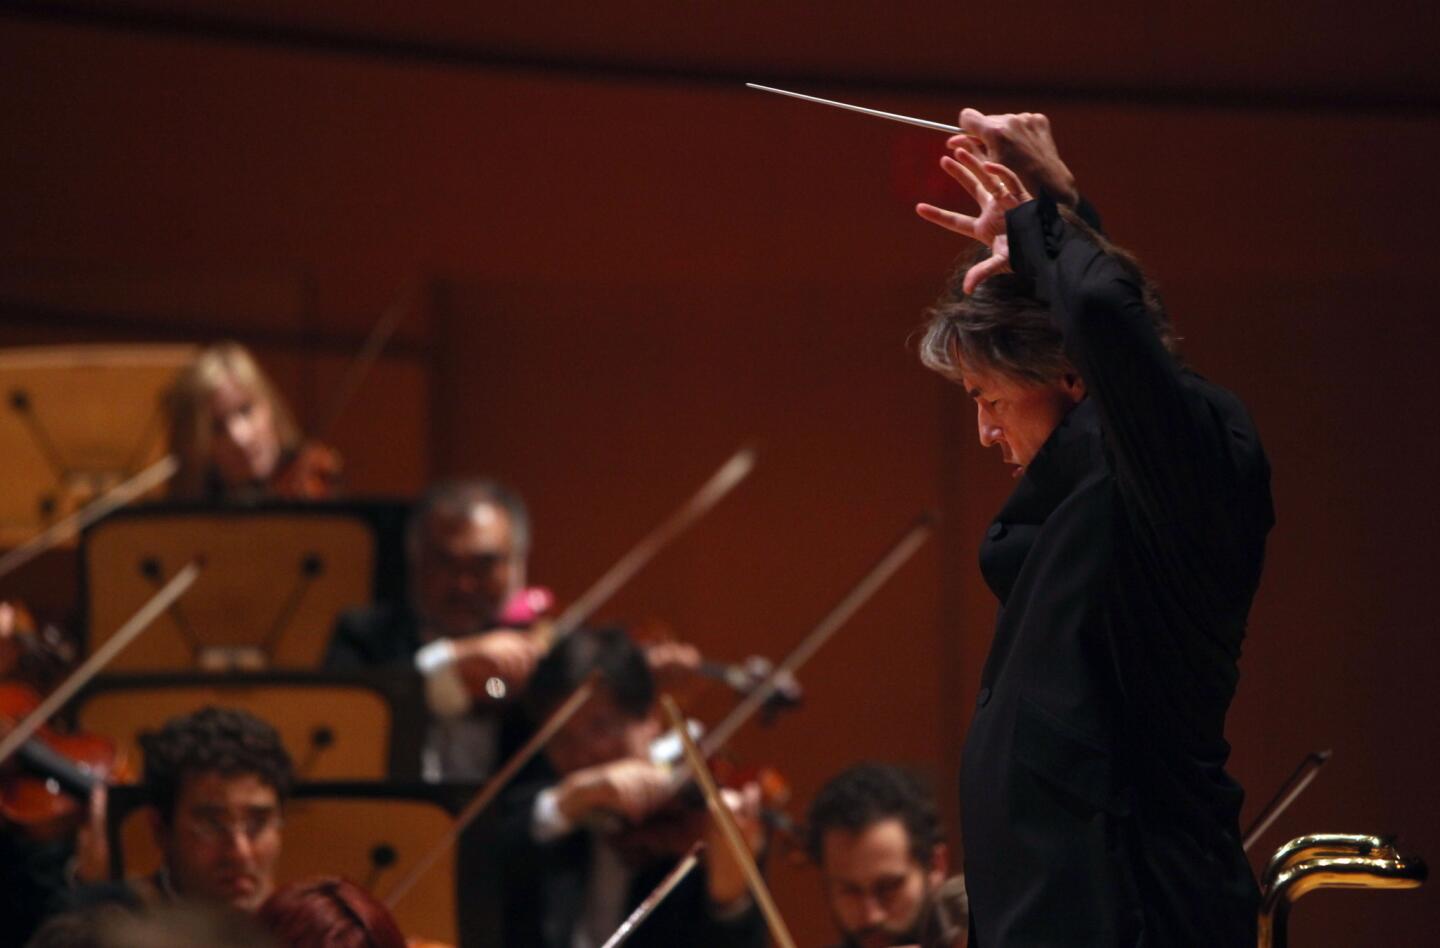 Arts and culture in pictures by The Times | Esa-Pekka Salonen returns to L.A. Phil